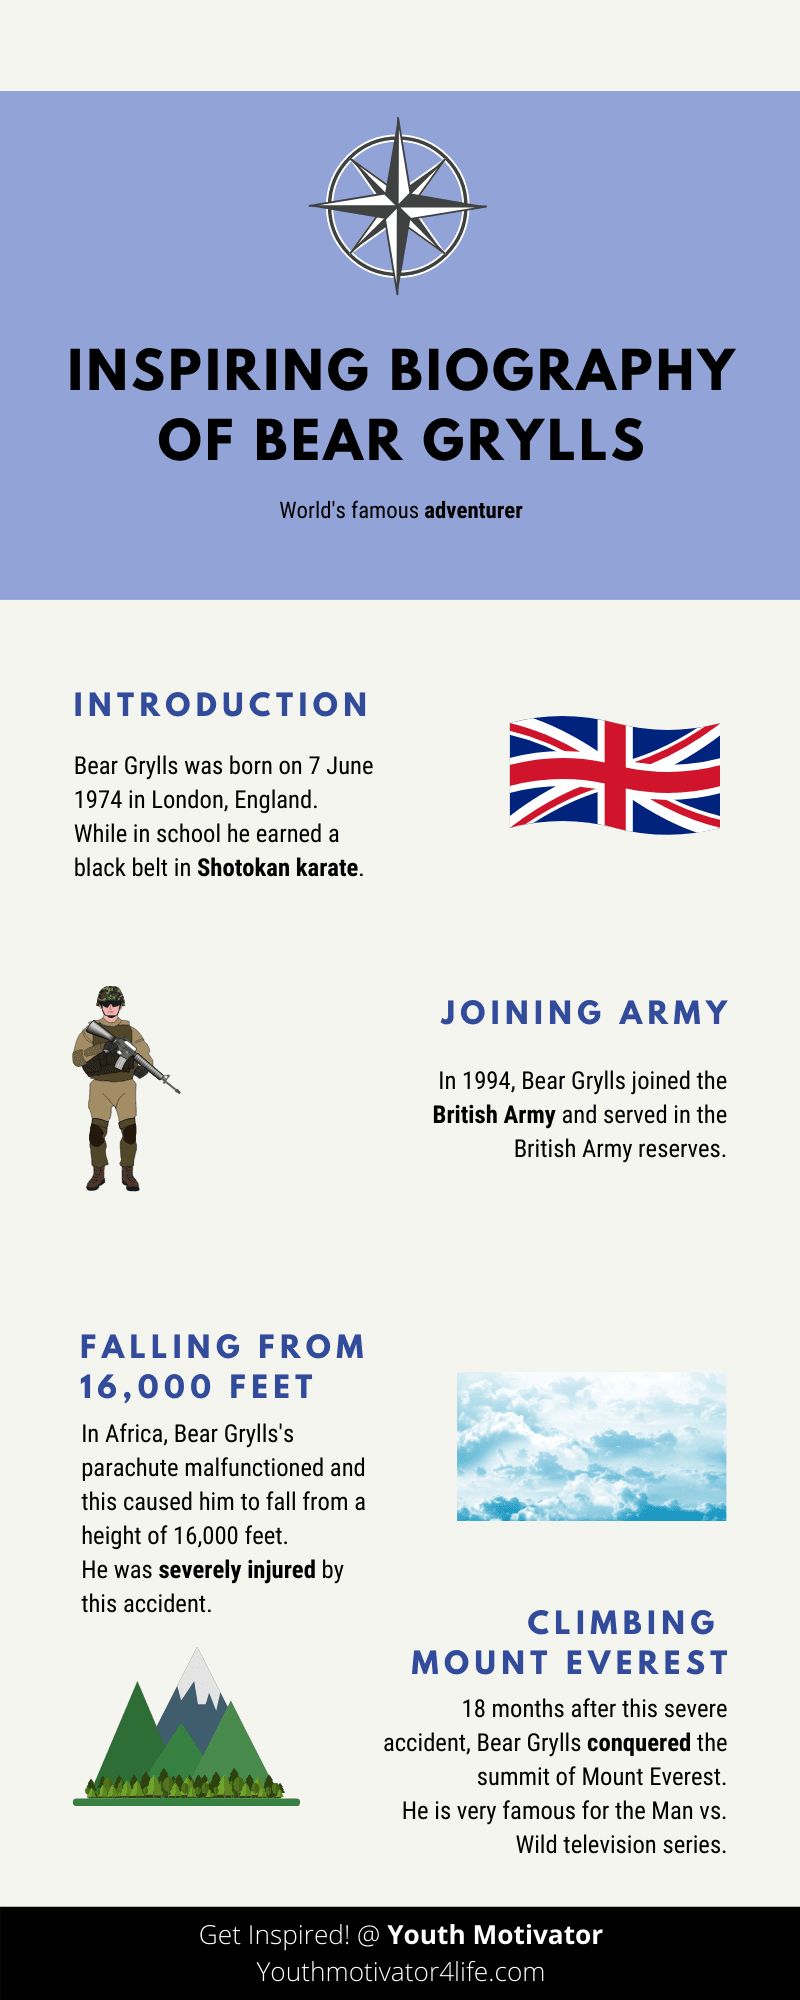 An infographic on biography of Bear Grylls